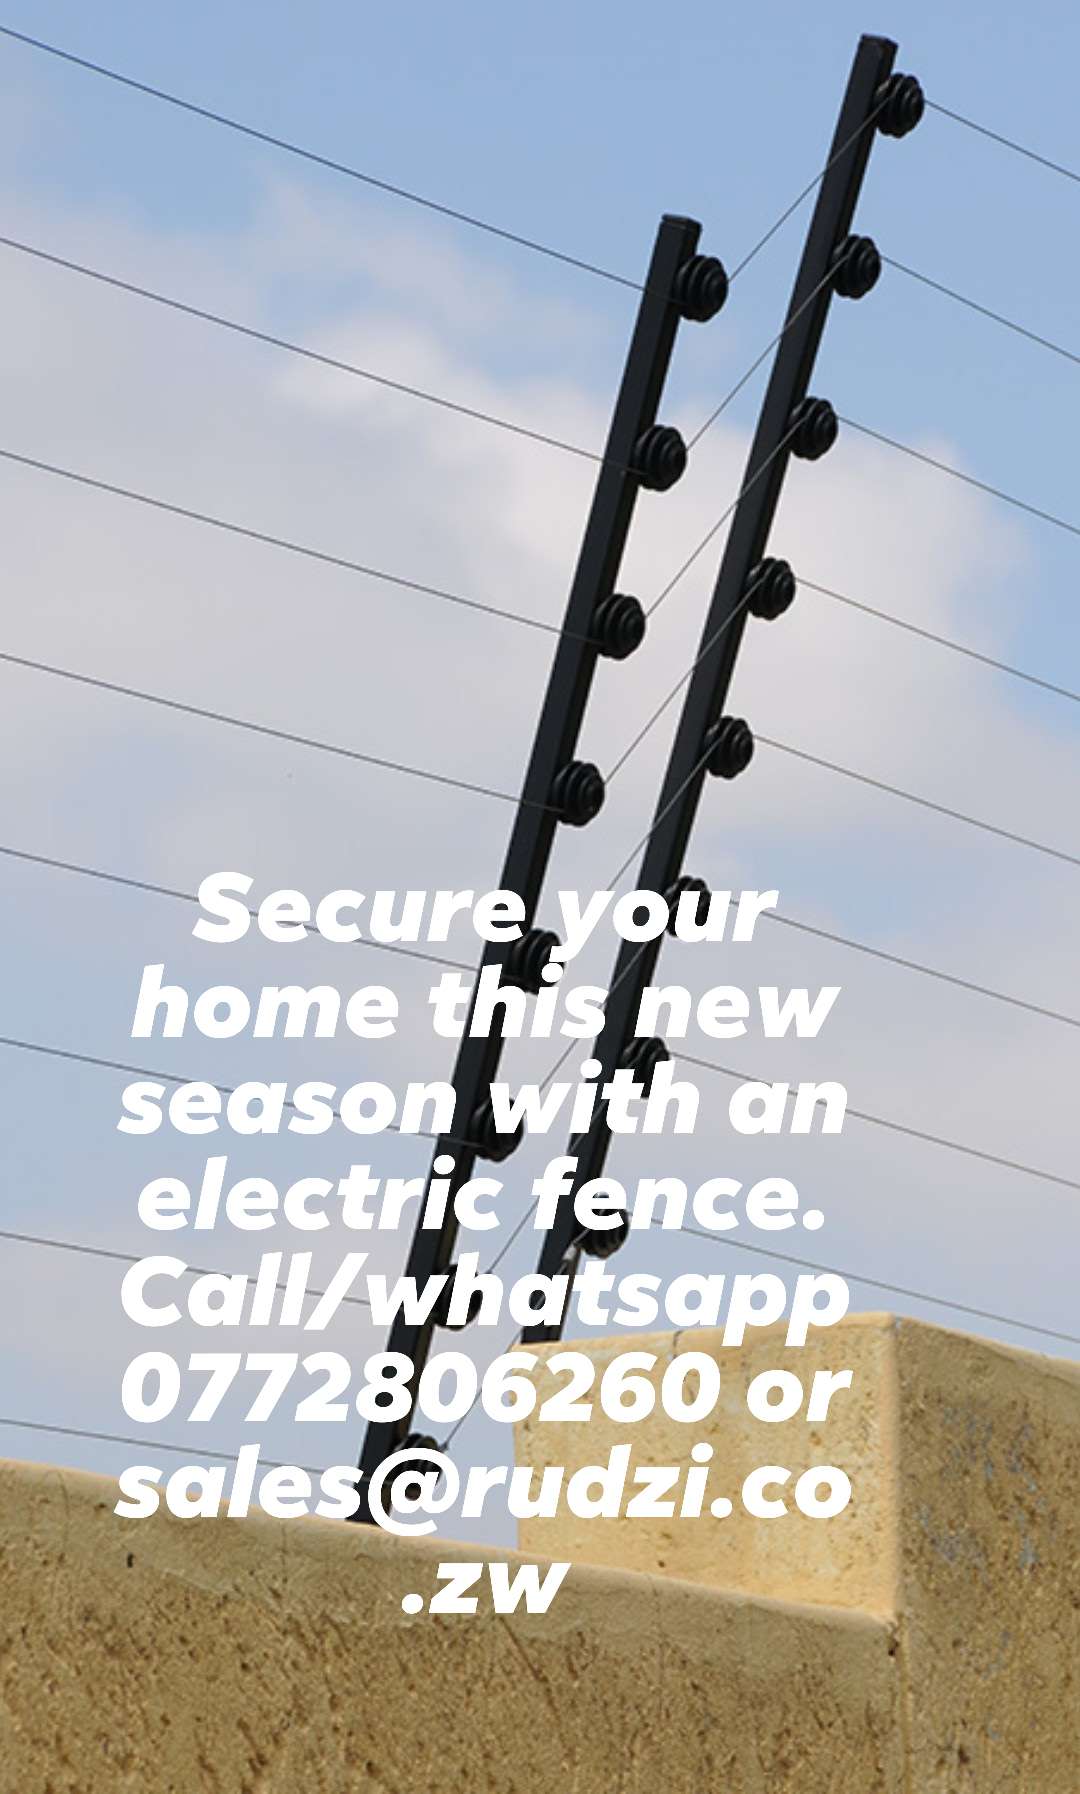 Shocking Deals On Electric Fence Installations. Call/whatsapp 0772806260